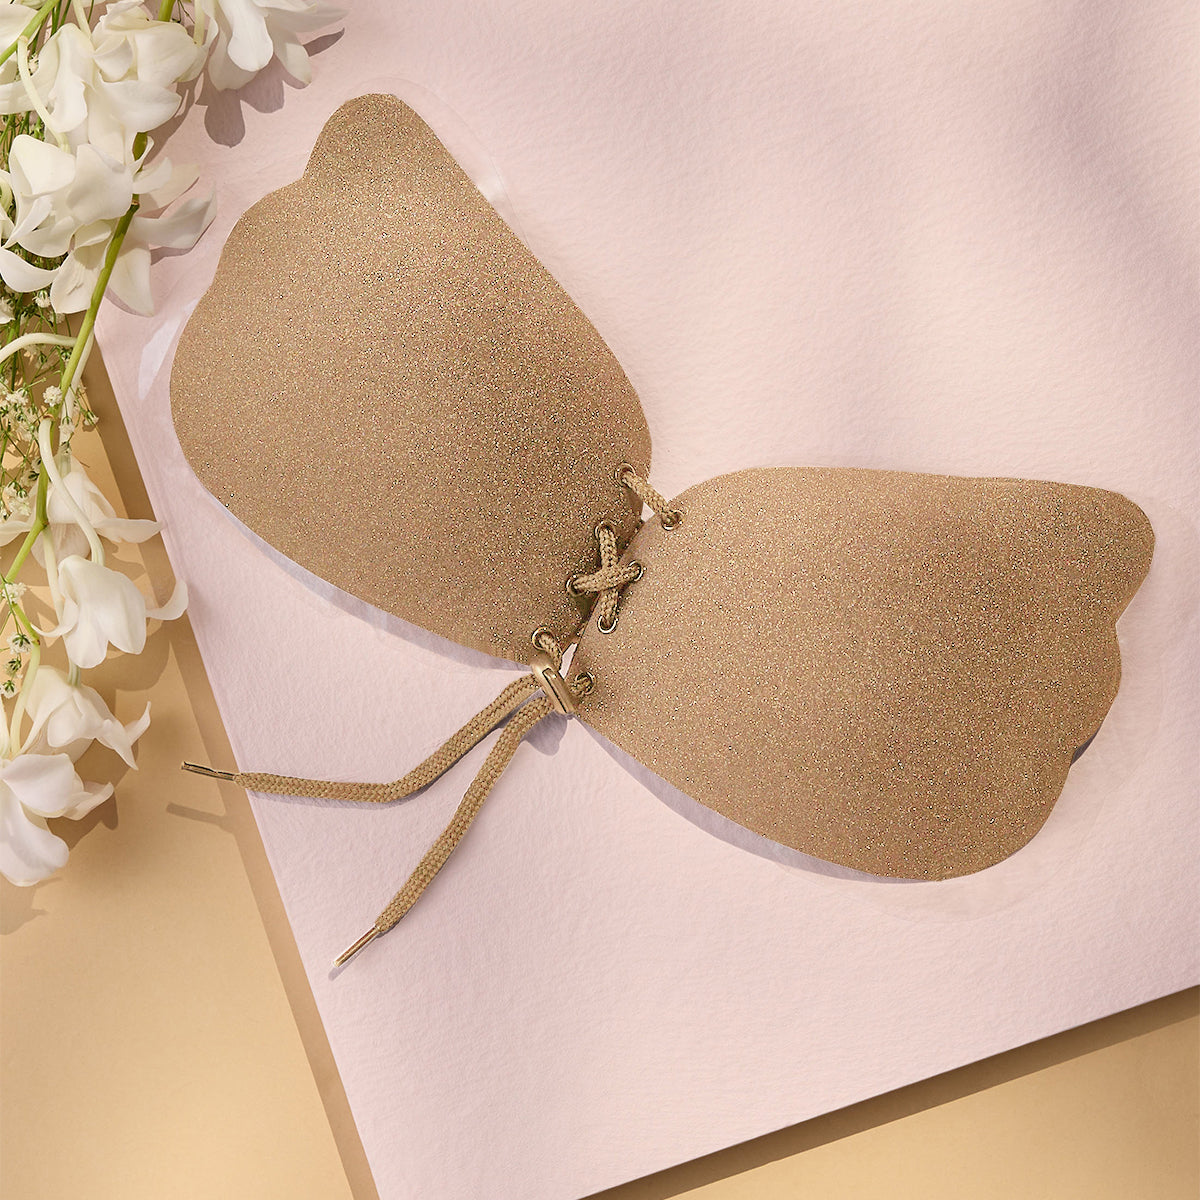 Silicone bra Butterfly Nude-NYA010